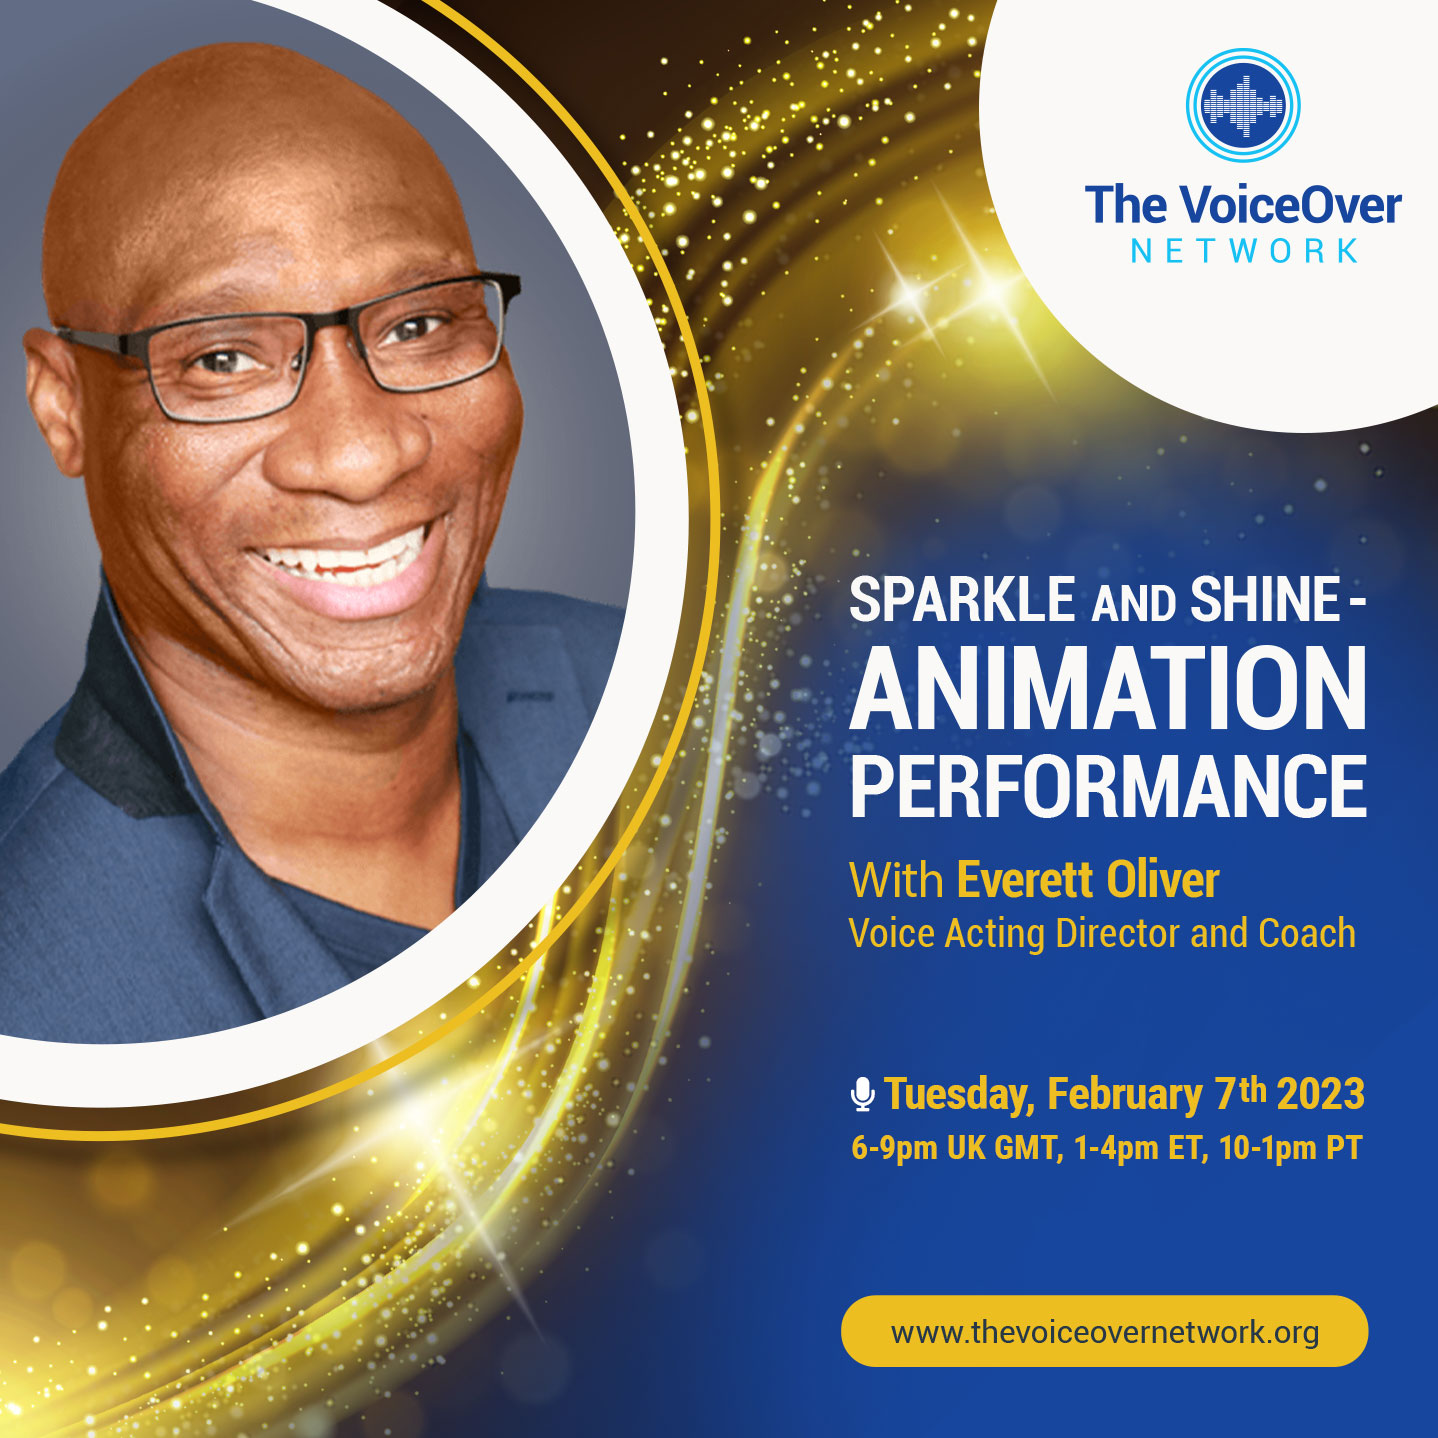 Sparkle and Shine - Animation Performance with Everett Oliver